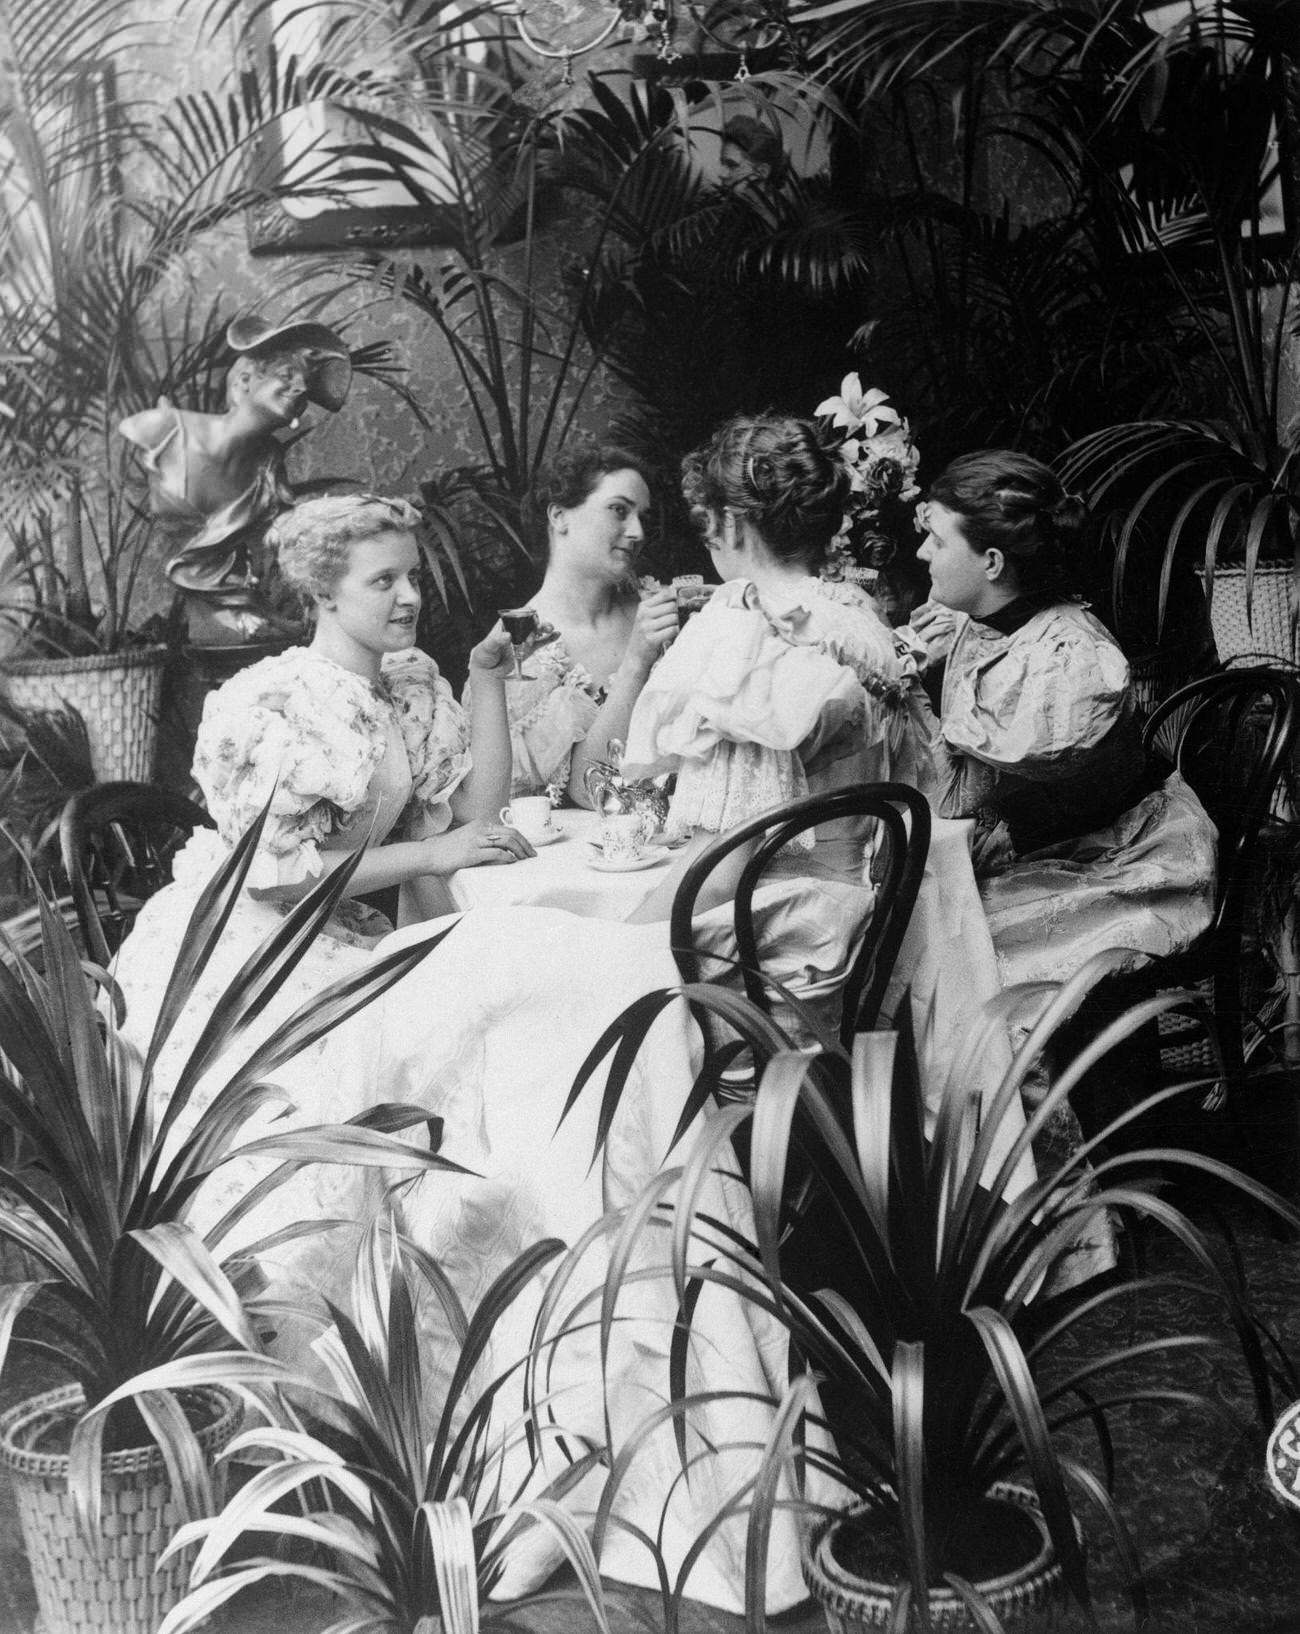 Victorian ladies at a tea party, late 19th century.